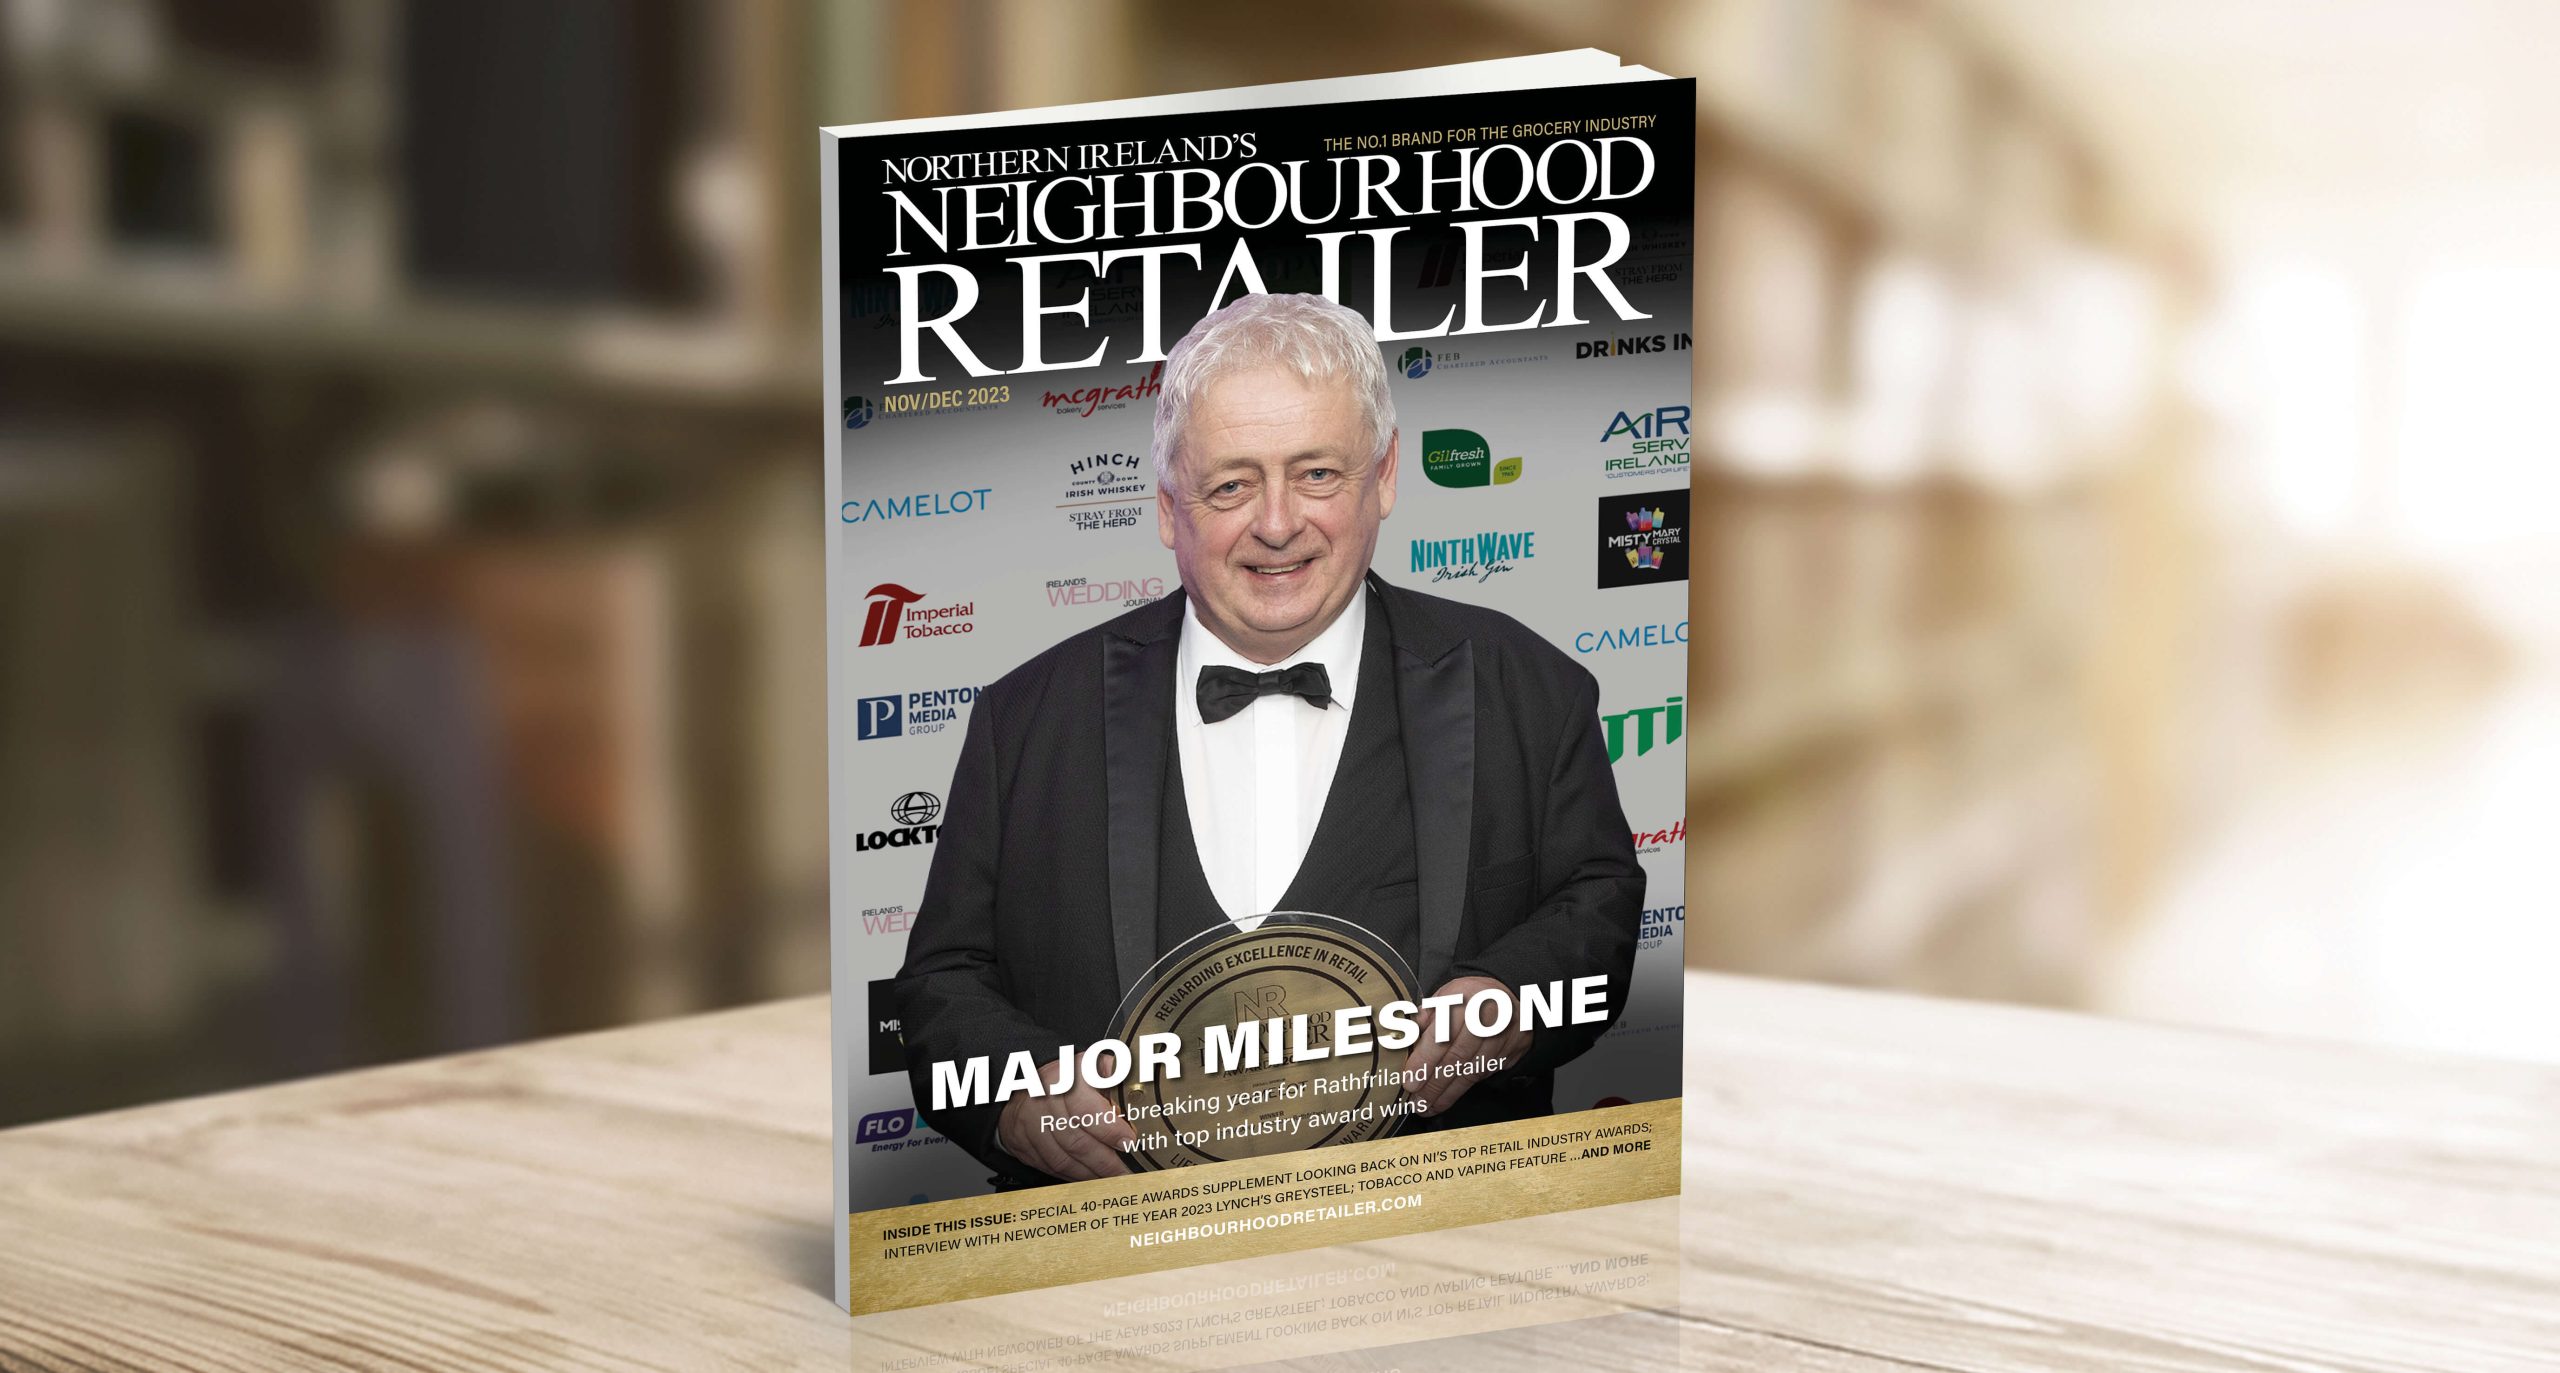 The latest issue of Neighbourhood Retailer is now live!